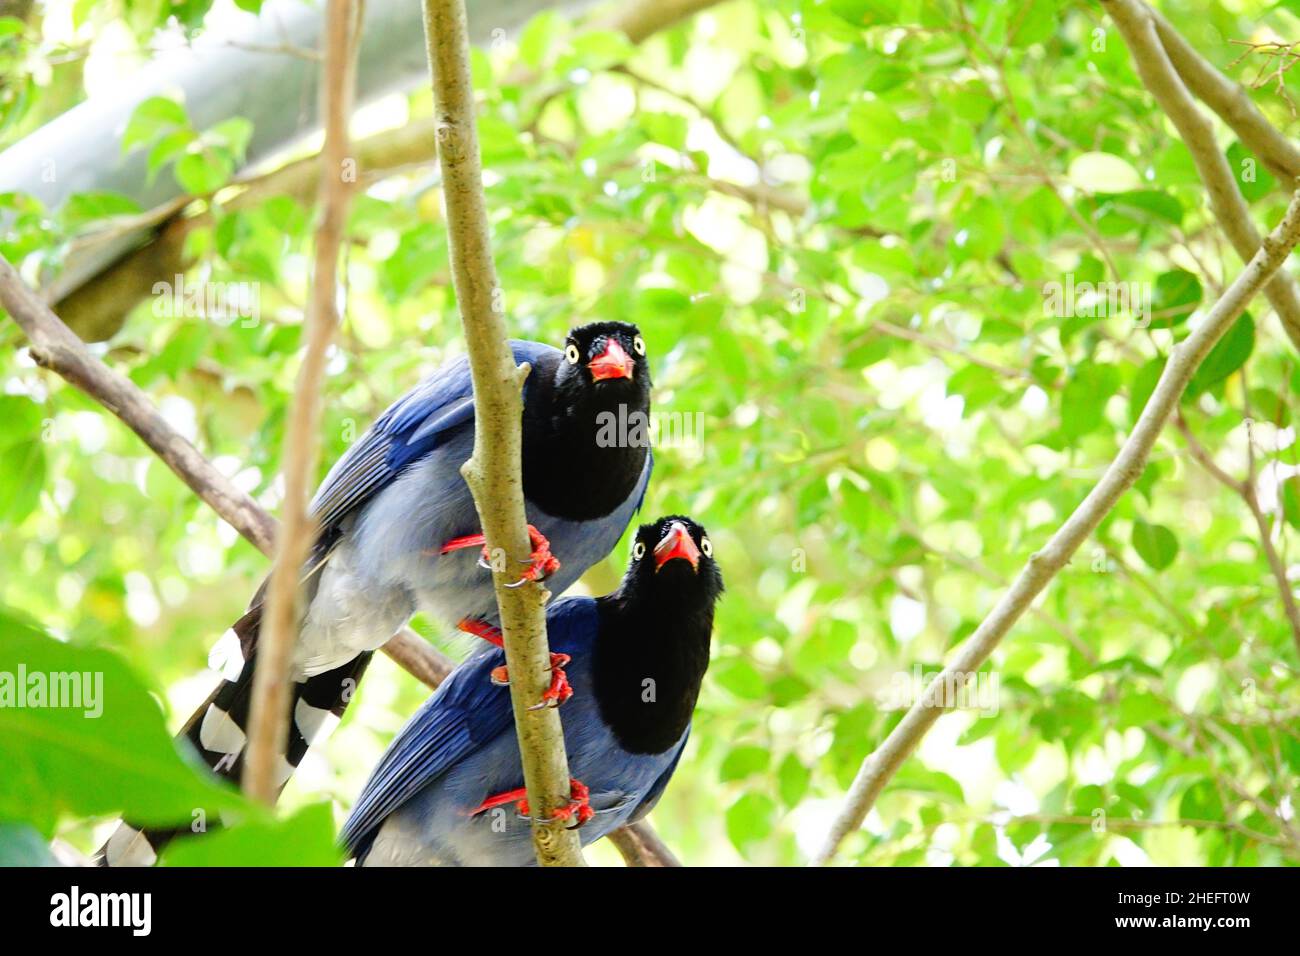 Taiwan blue magpie (臺灣藍鵲), also called the Taiwan magpie or Formosan blue magpie, is an endemic bird species of Taiwan. Stock Photo